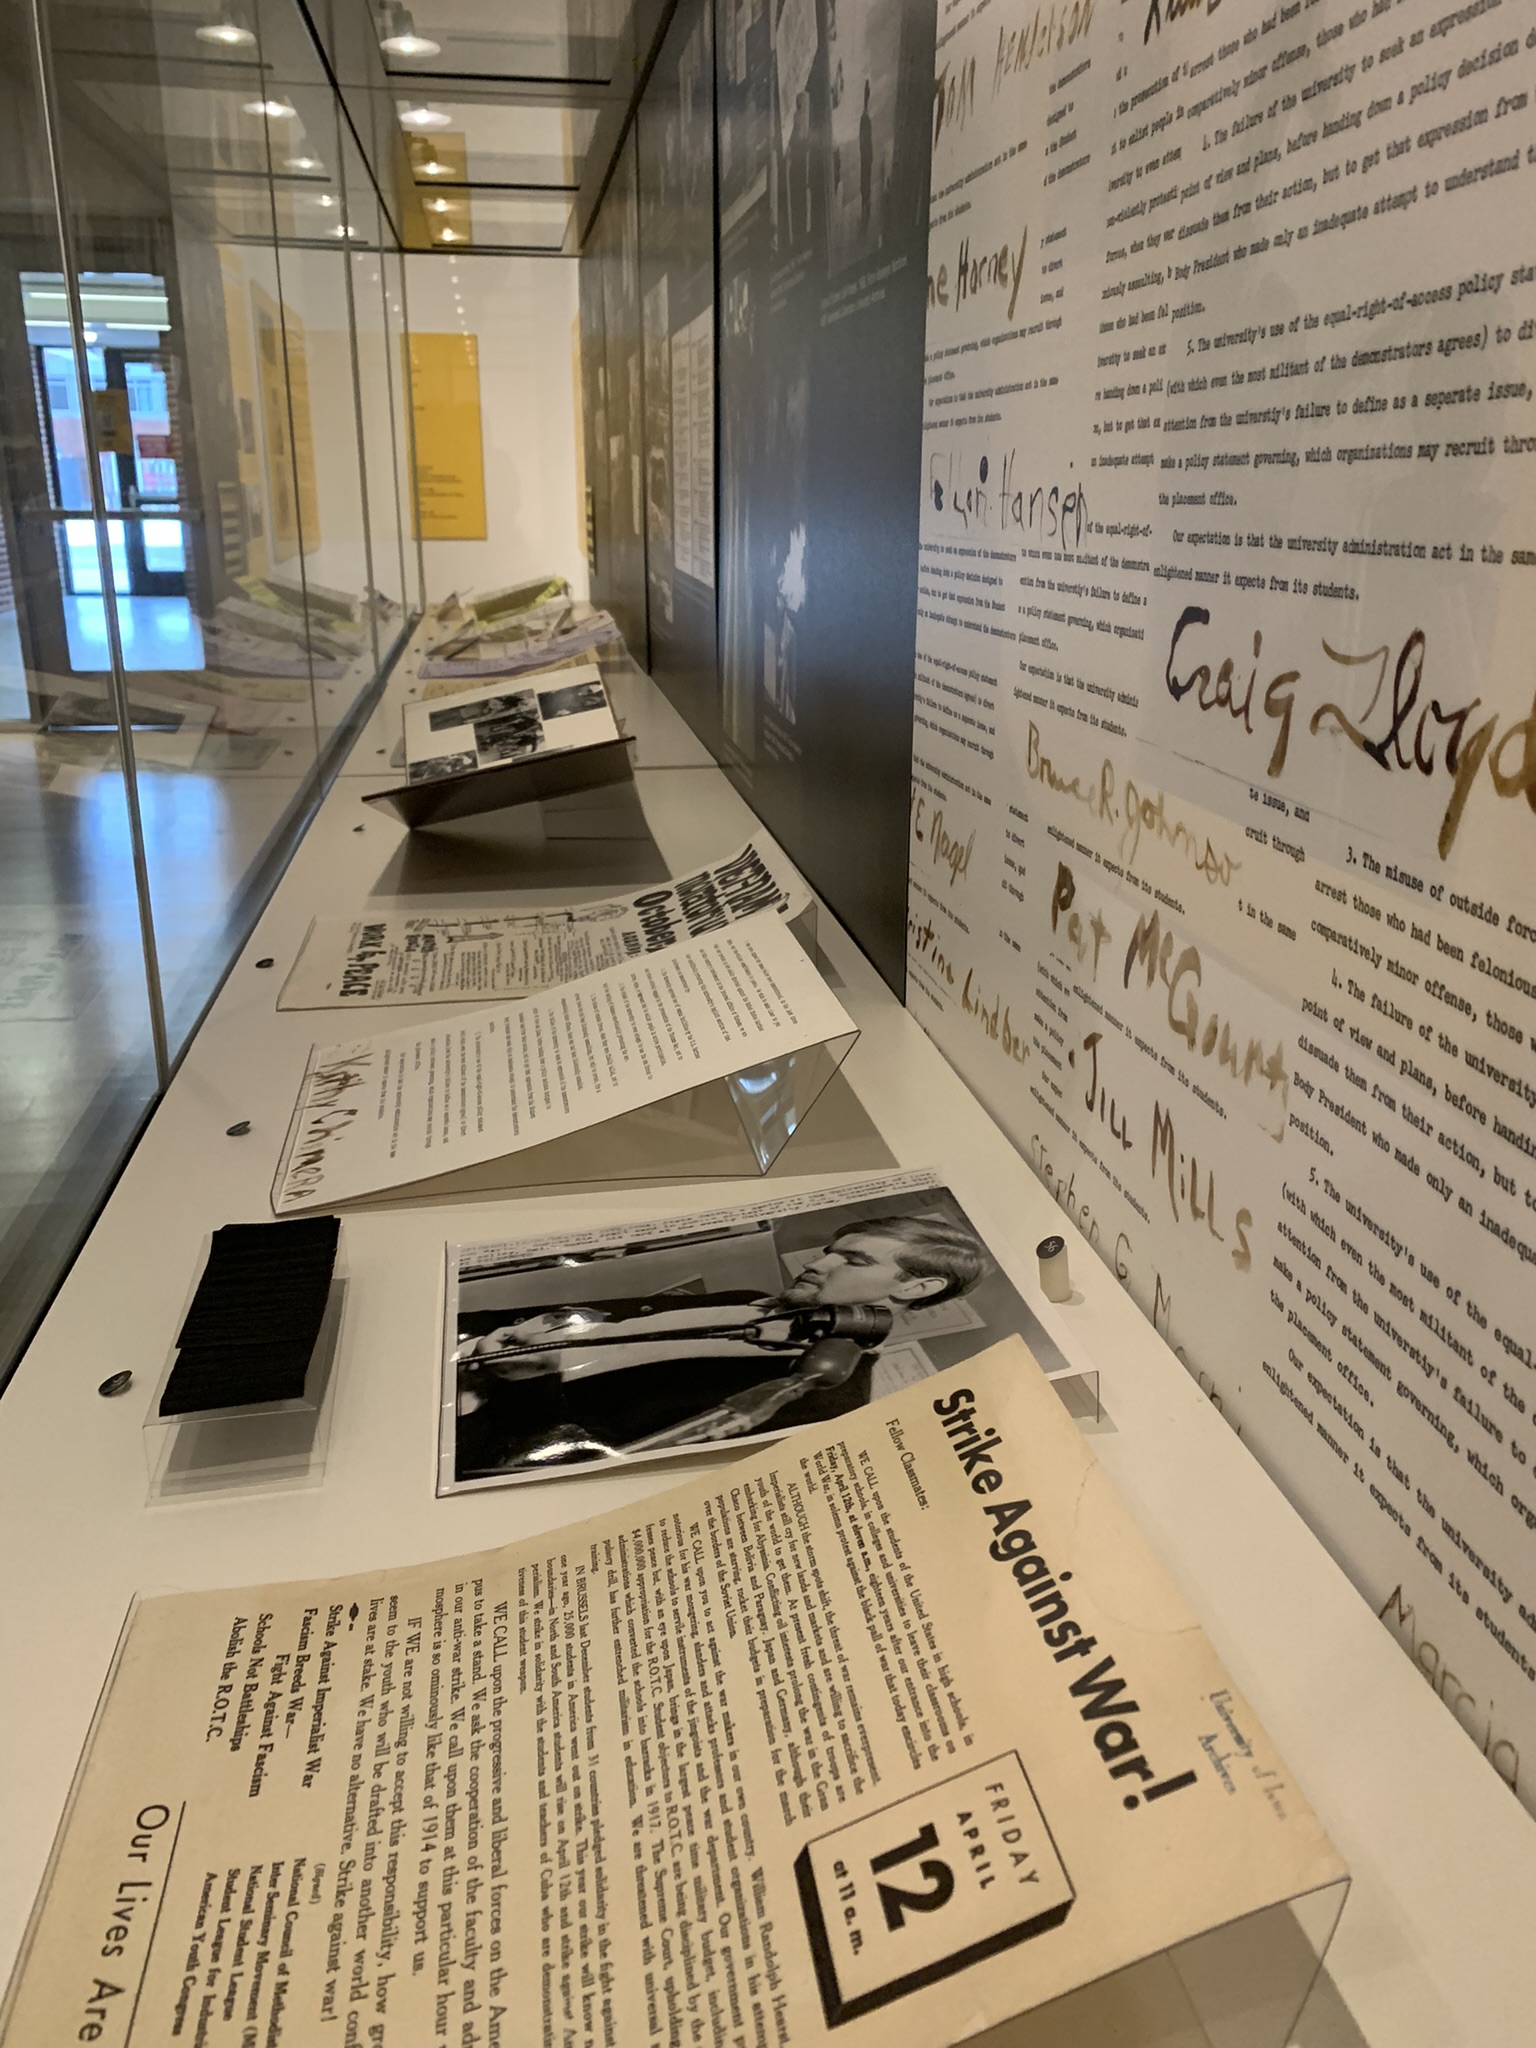 Several flyers protesting various injustices or issues are included in a display case. Most prominently, a black and white photo shows Steve Smith burning his draft card in the 1960s.